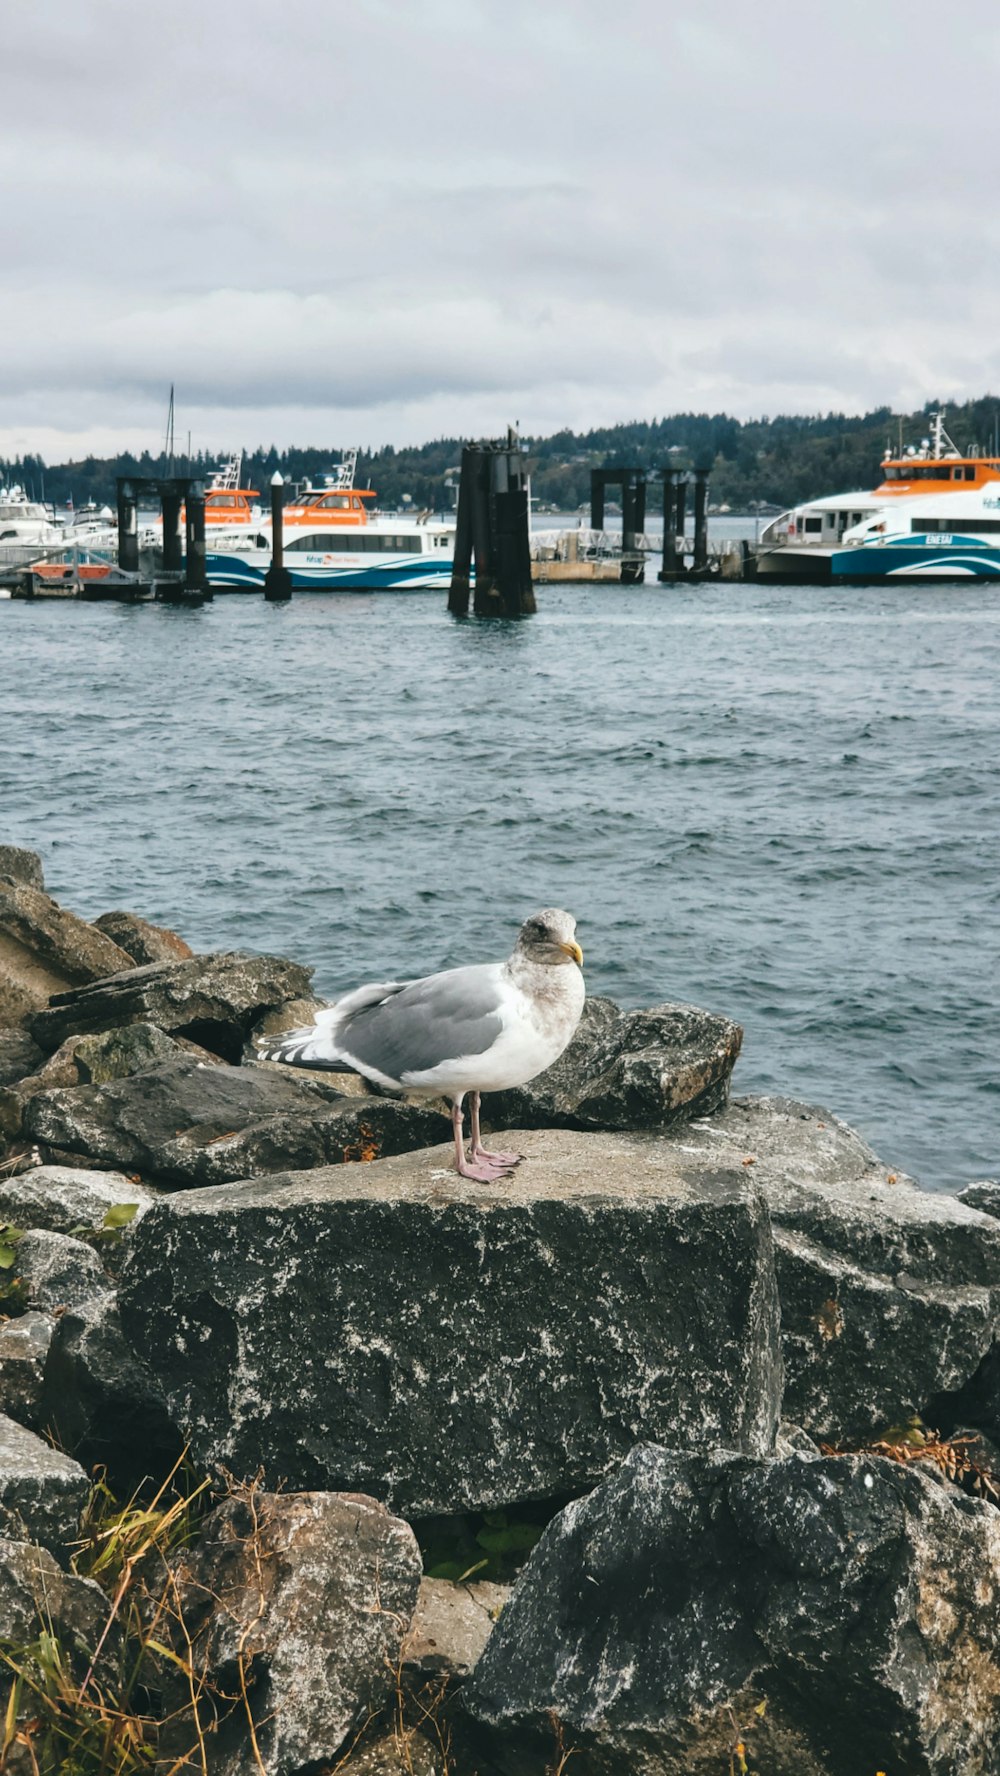 a seagull on a rock by the water